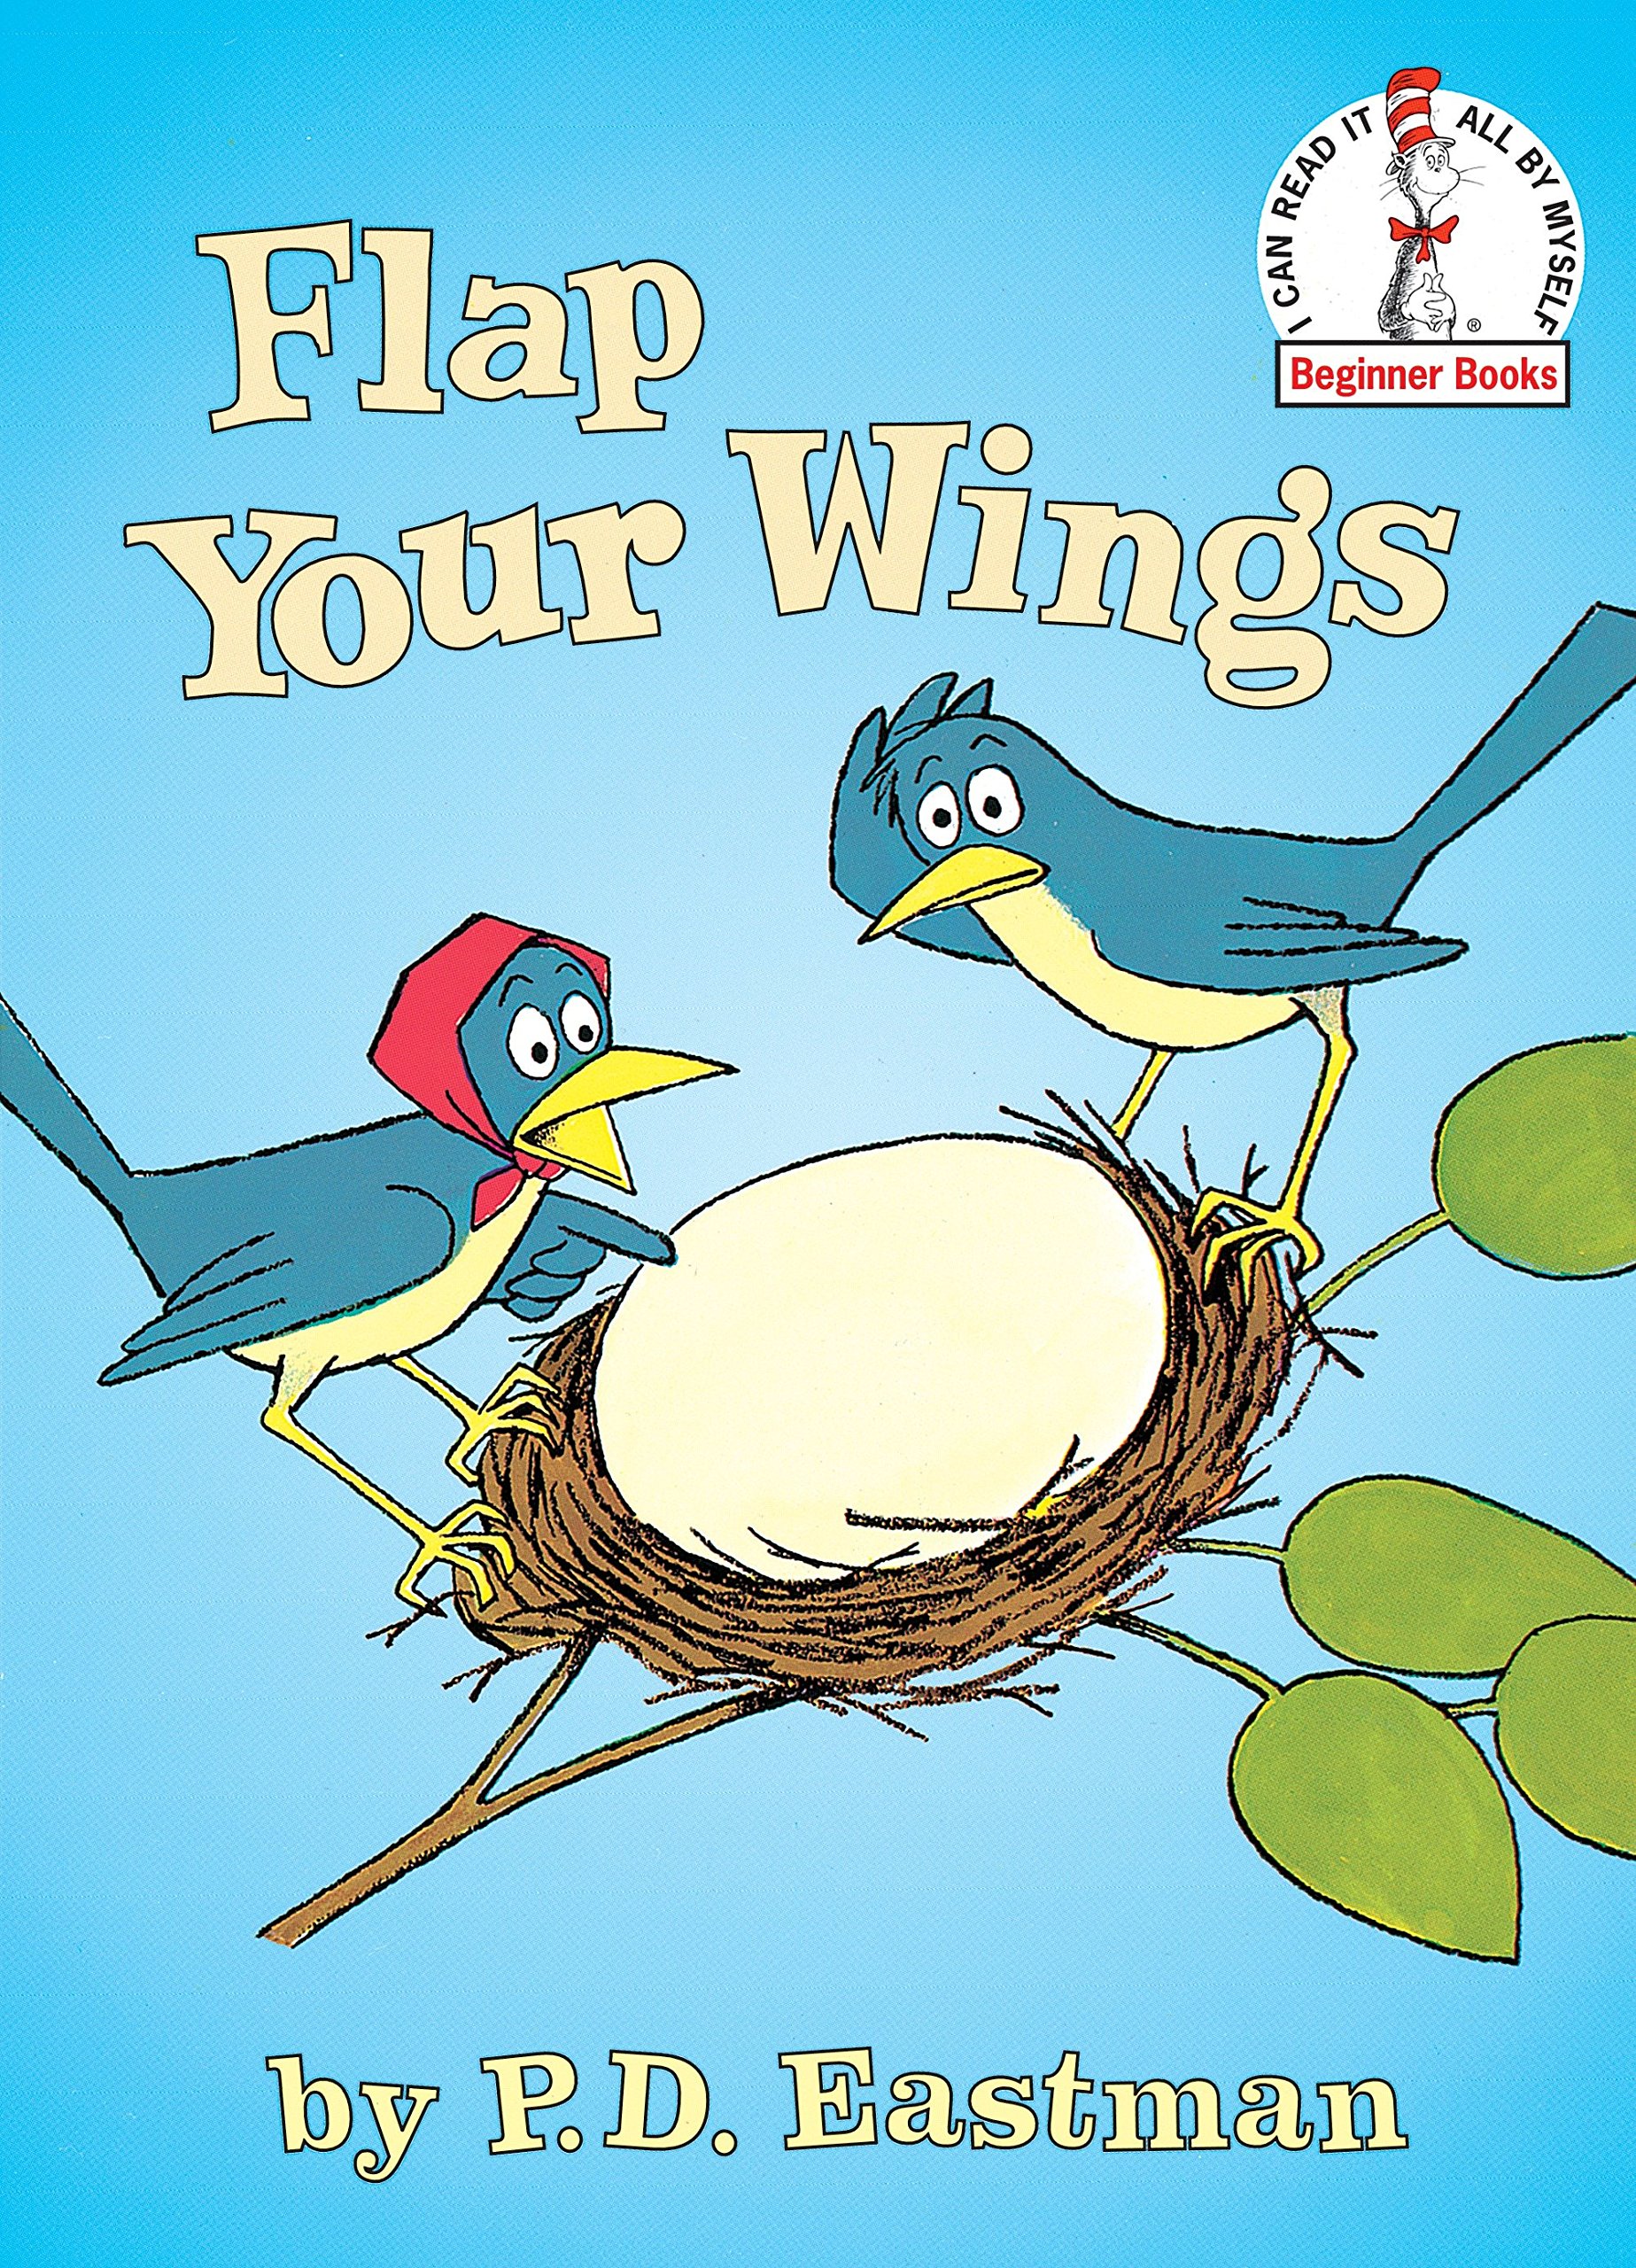 Flap your wings(pbk.)